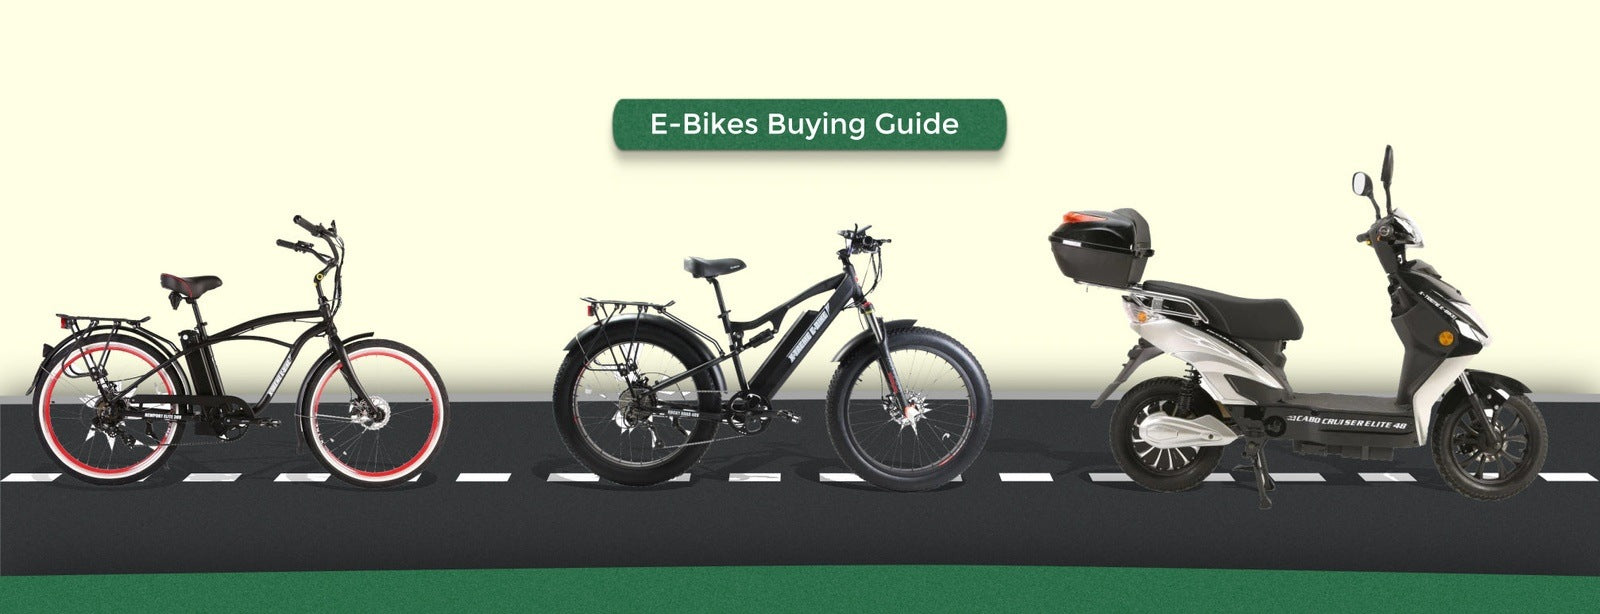 Complete Guide to Choosing the Best E-Bike for Your Lifestyle